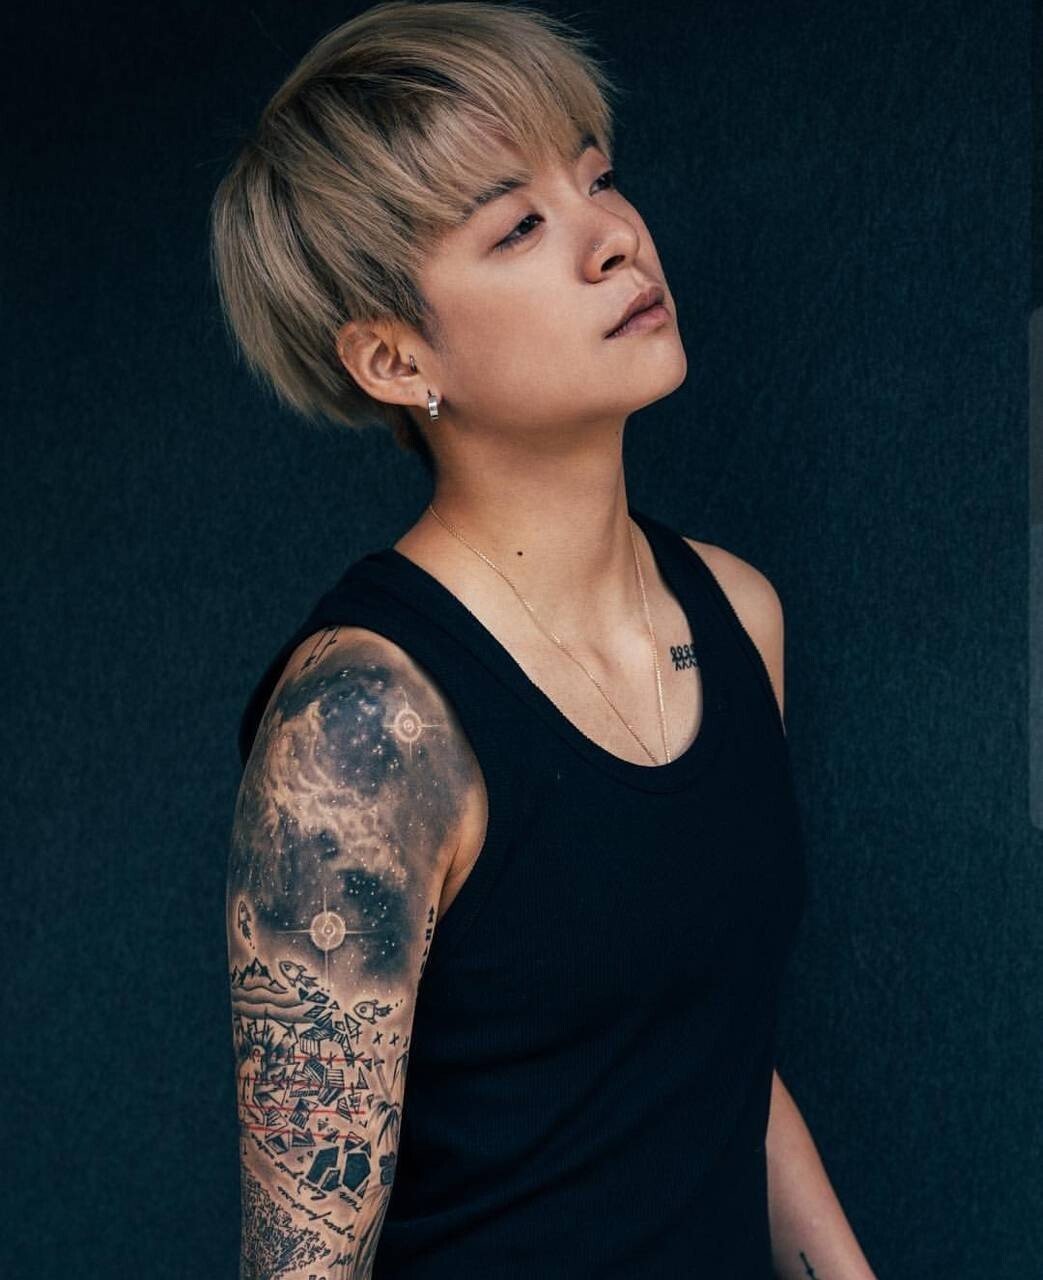 Amber Liu Apologizes For Comments About Online Interaction  Billboard   Billboard